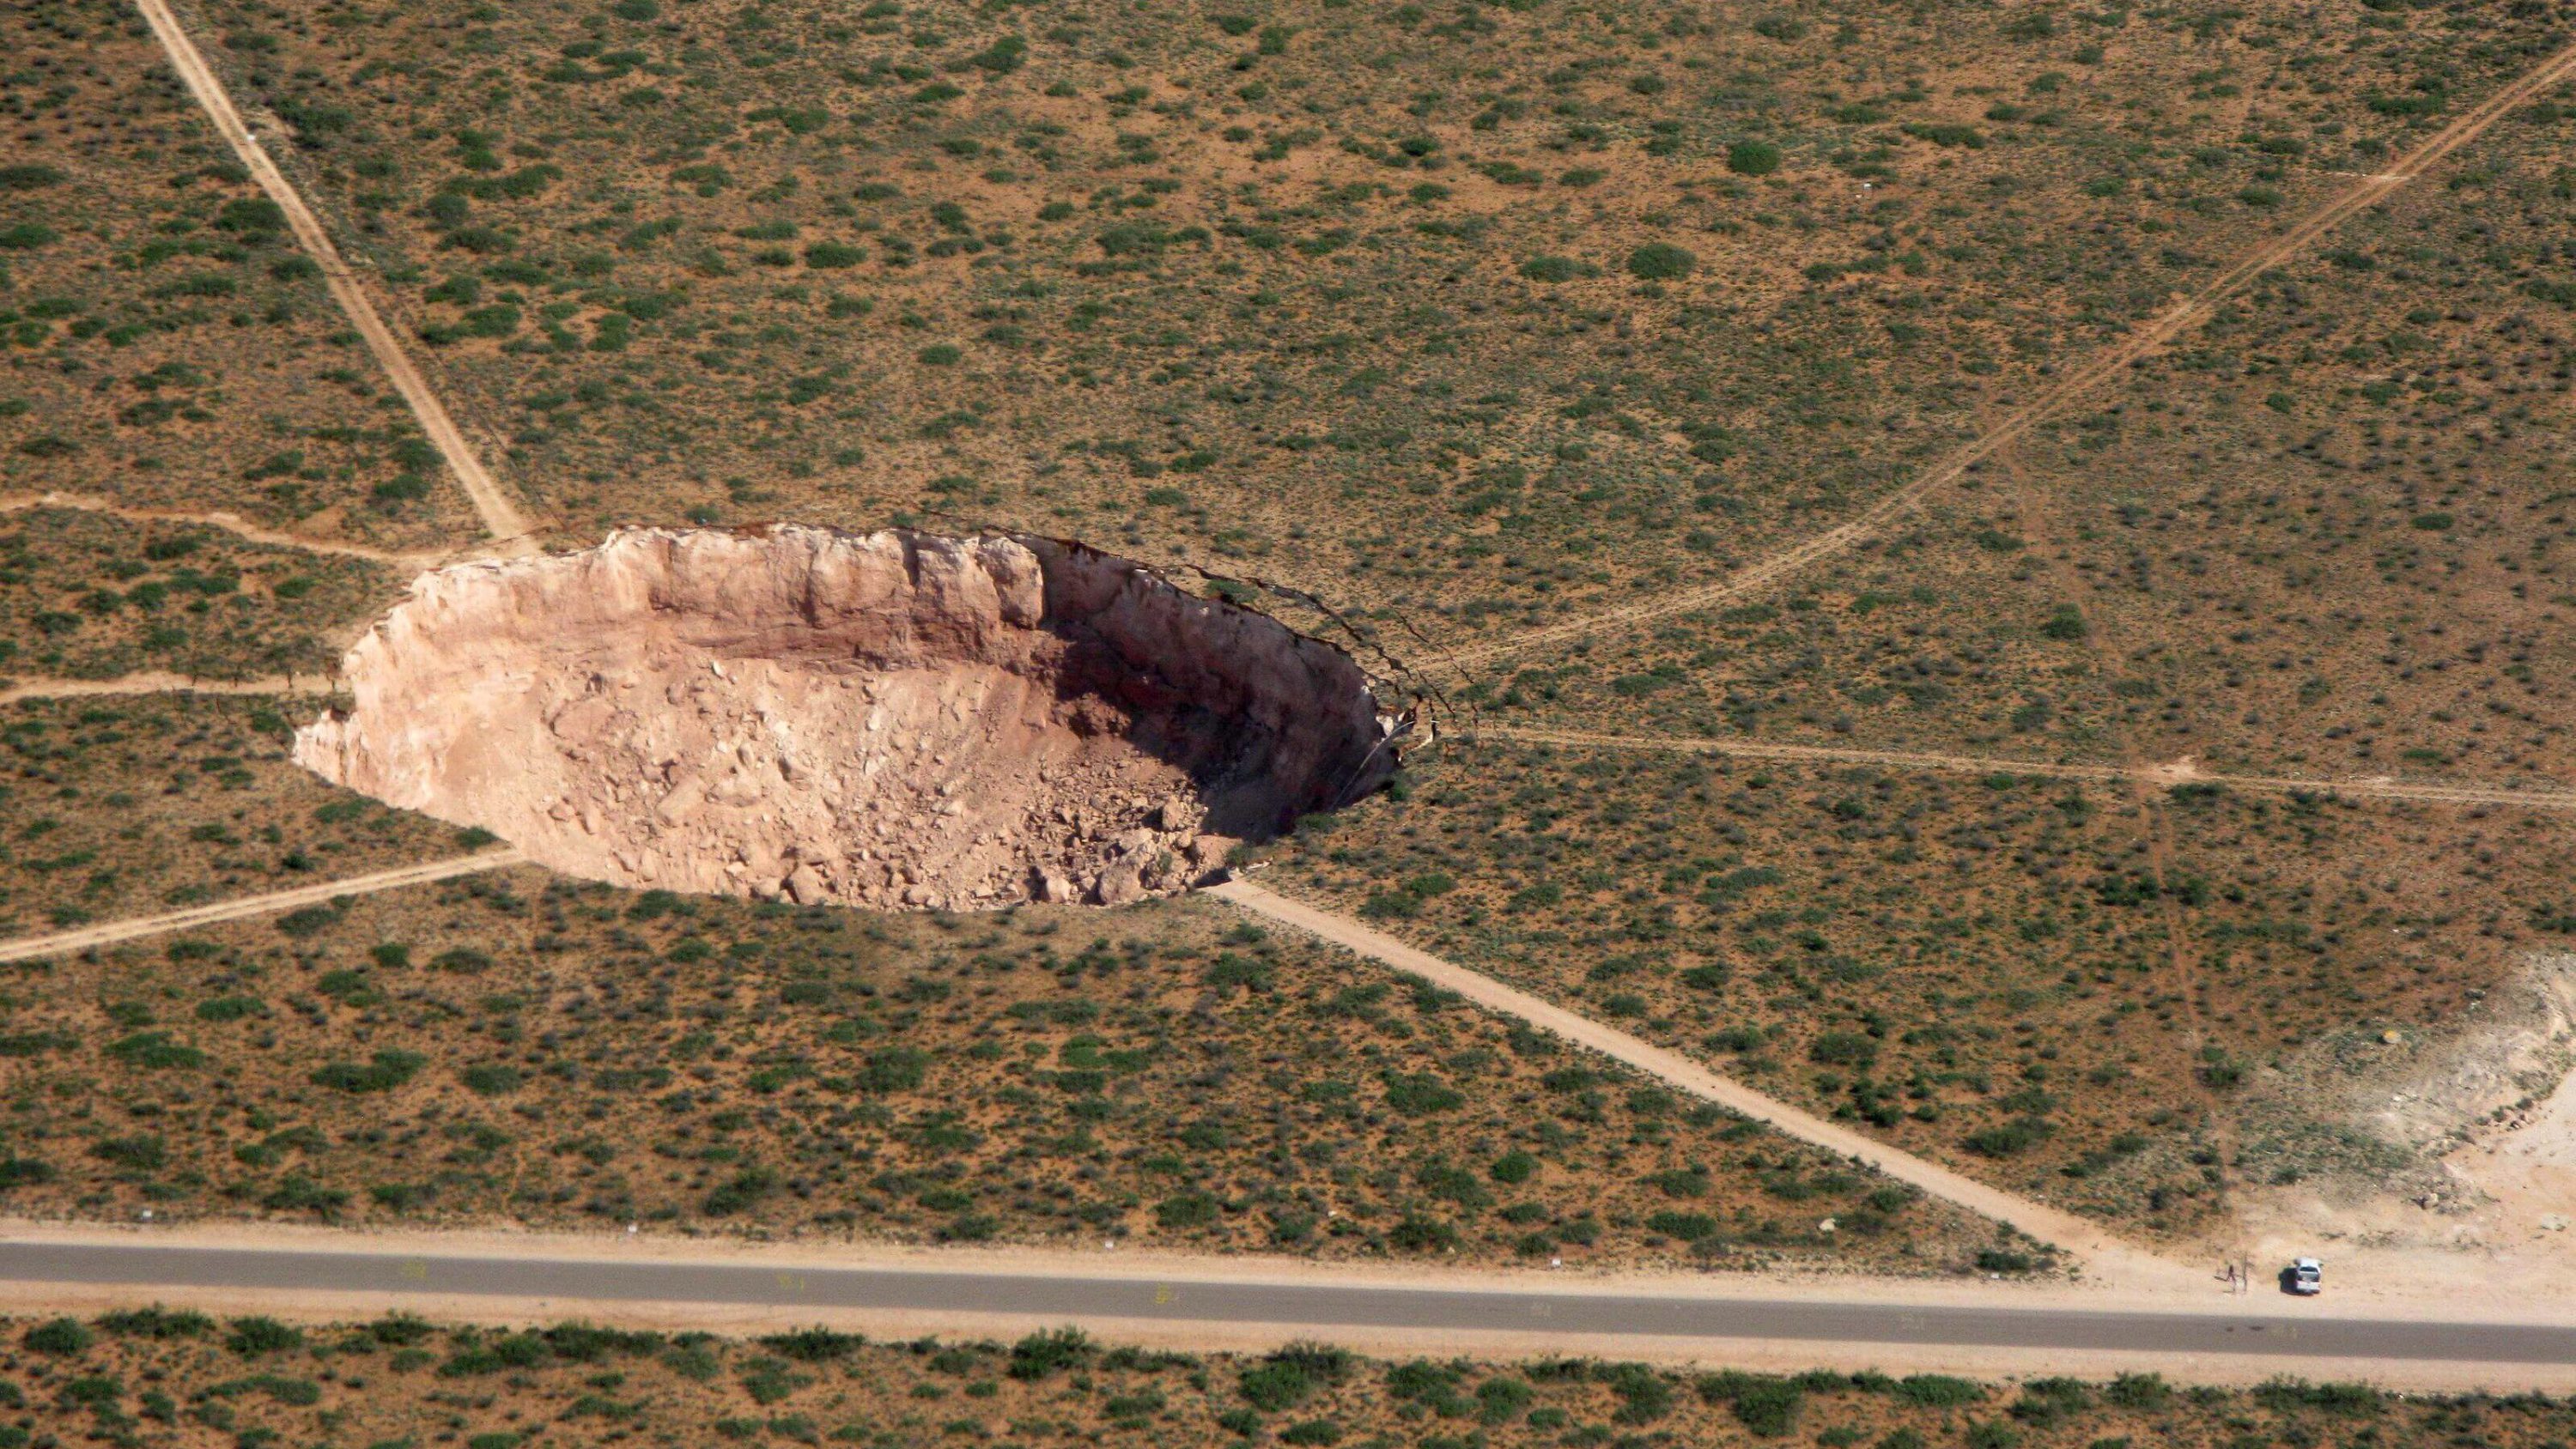 Land research shows a sinkhole in Eddy County, New Mexico